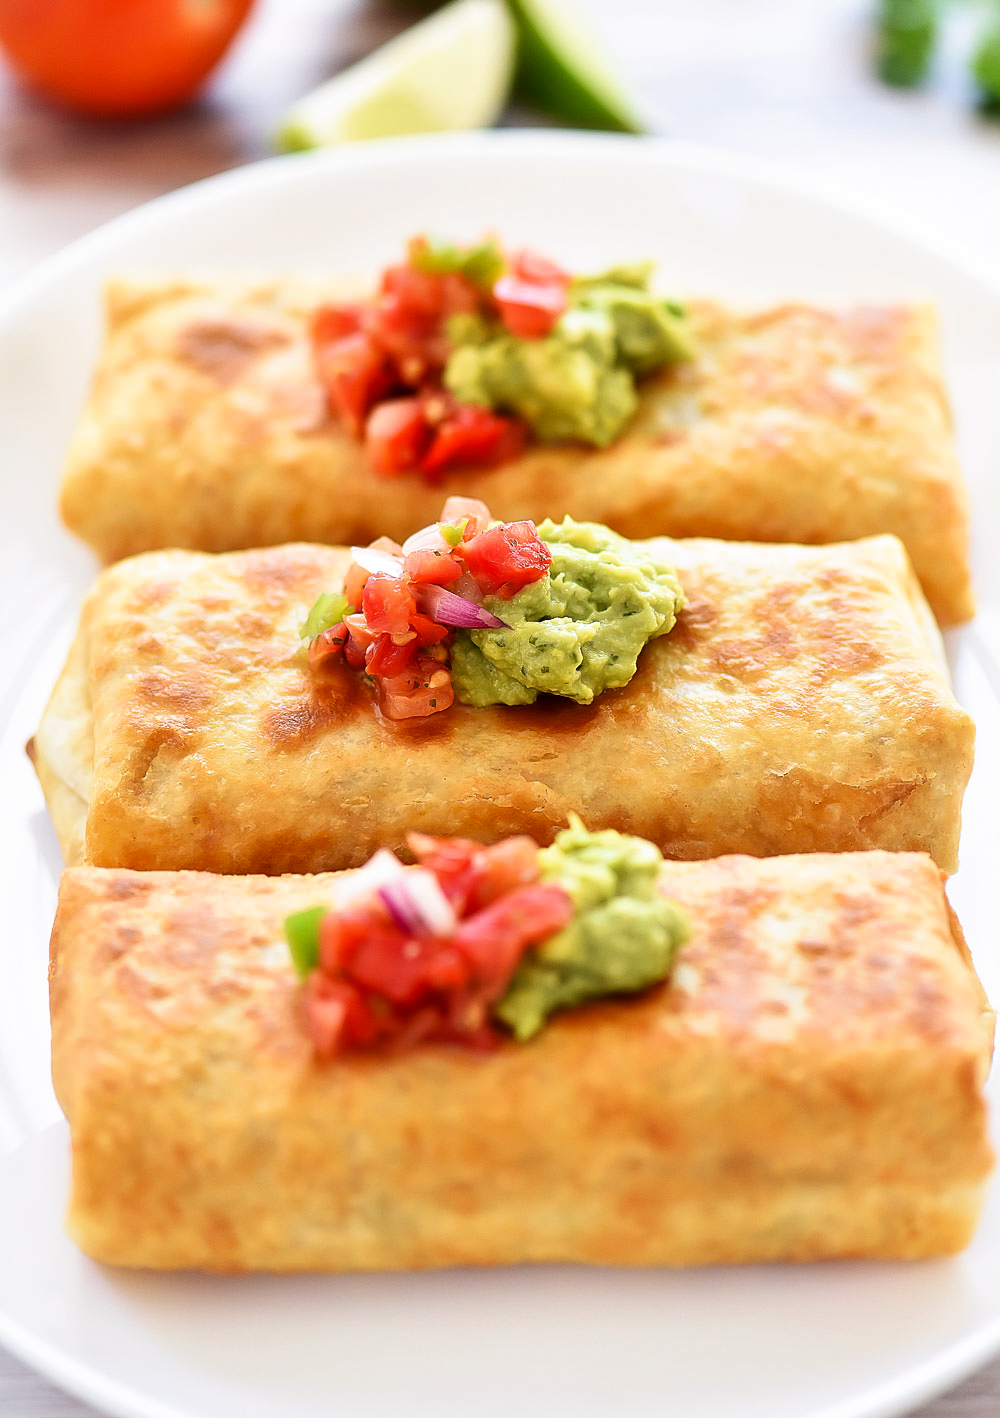 Beef Chimichangas - Num's the Word